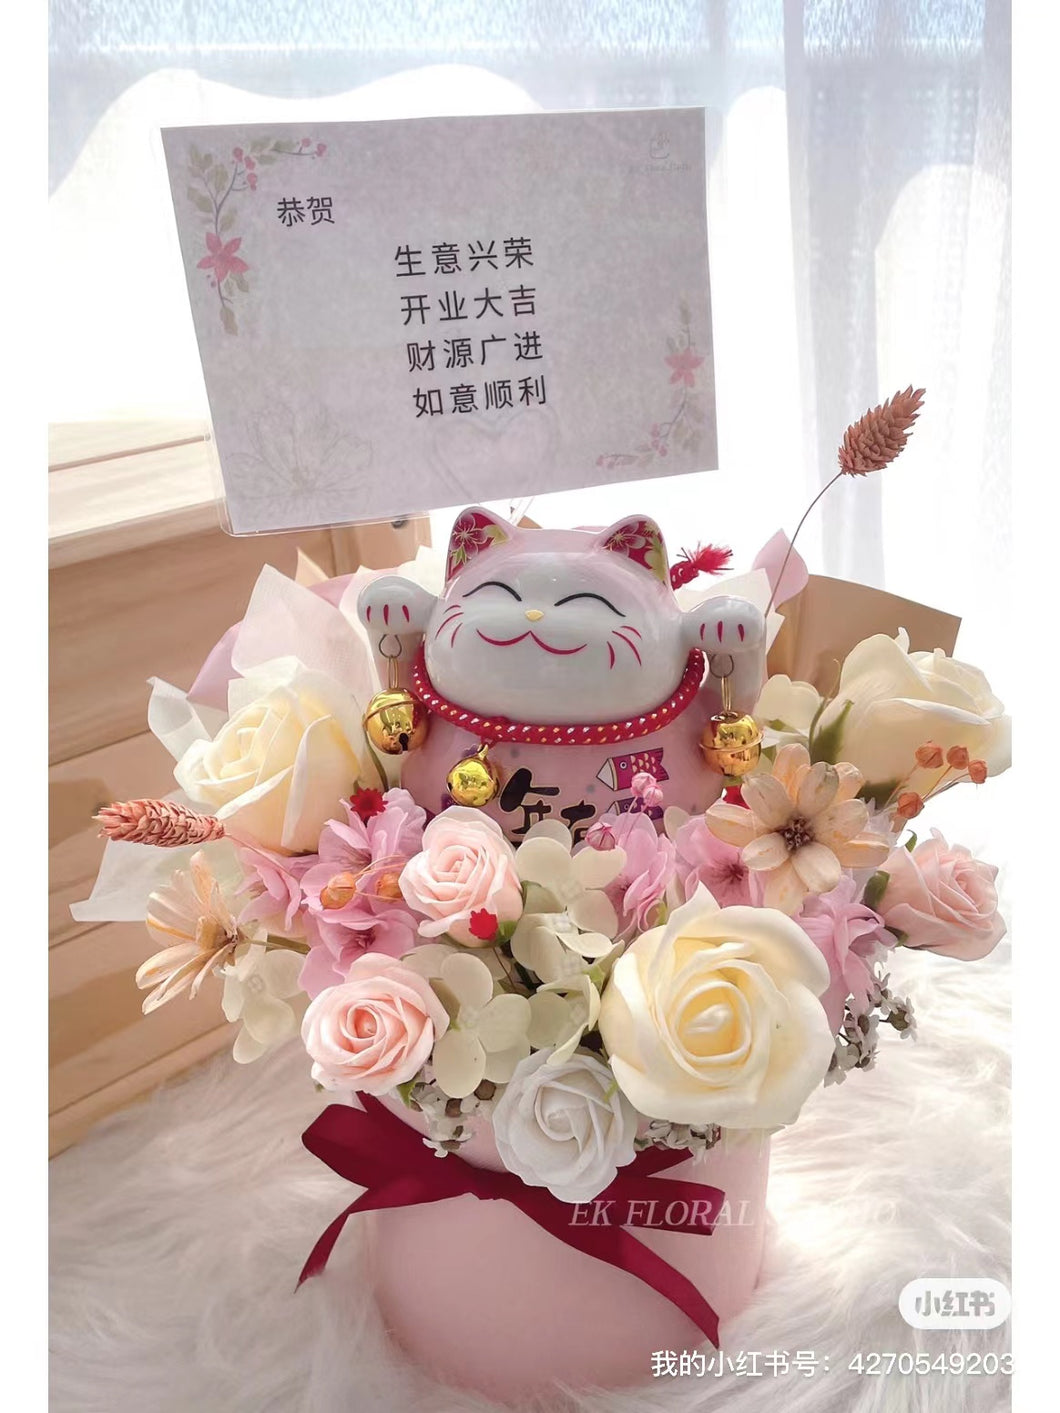 Blossom Soap Flower Bucket with Fortune Cat 财运顺招财猫香皂开业花桶